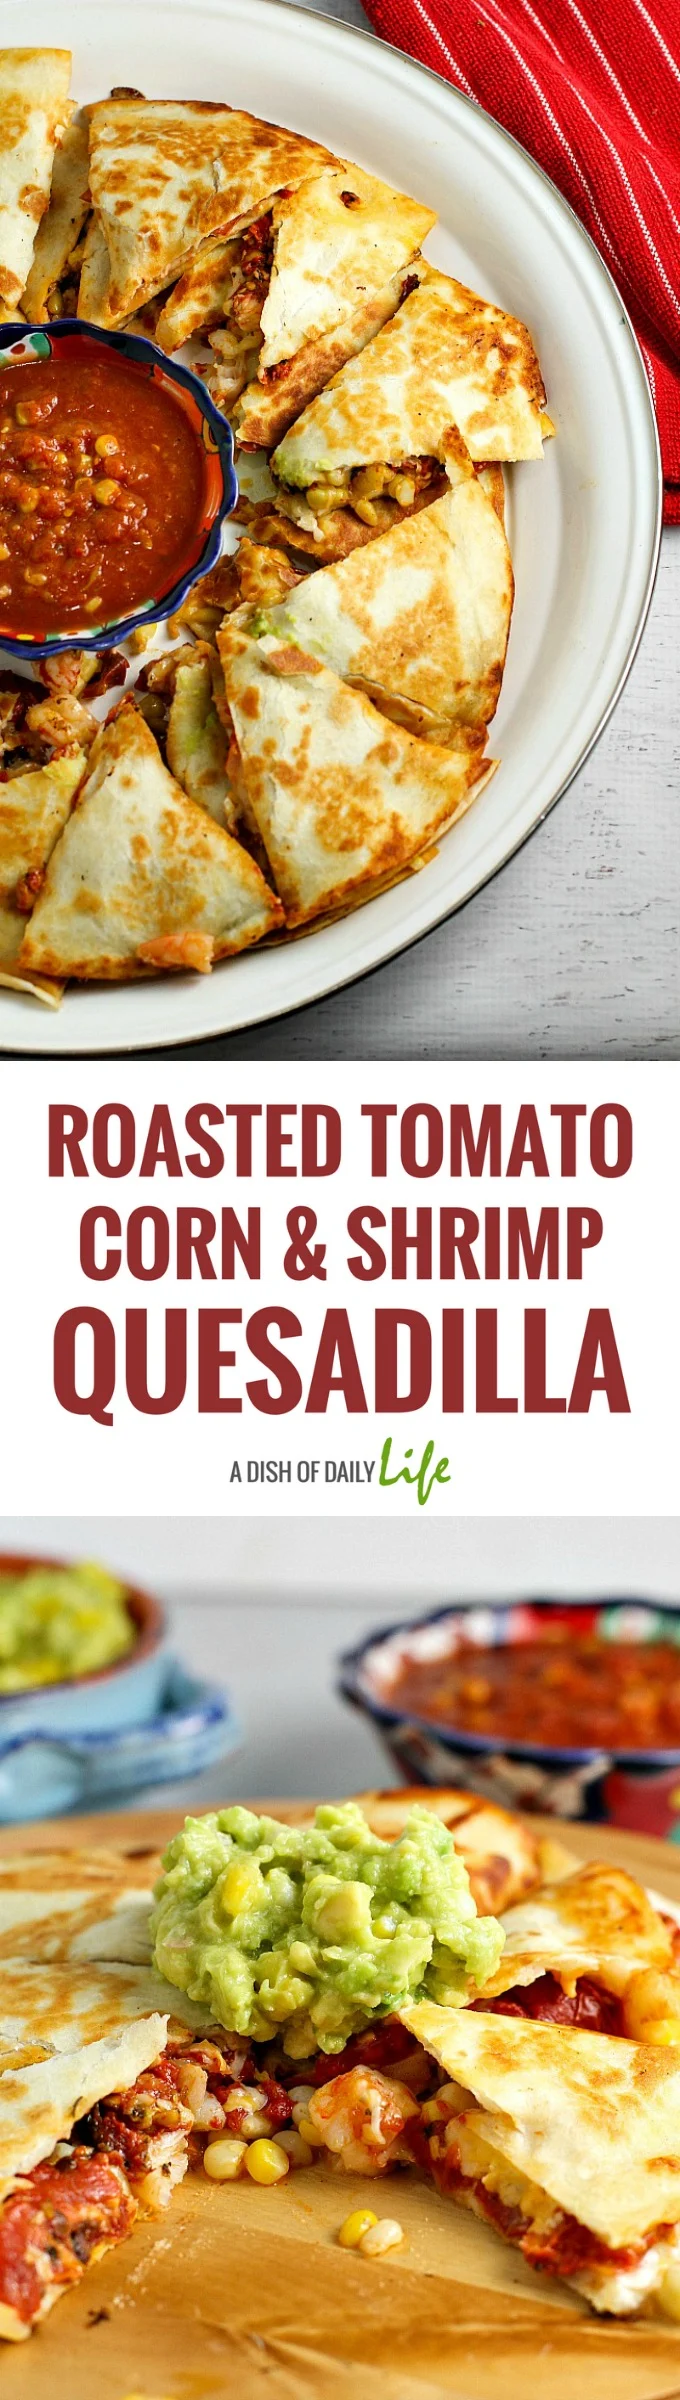 Roasted Tomato, Corn, and Shrimp Quesadillas are a great appetizer for Mexican night, any party or gathering, and of course Cinco de Mayo. Guaranteed rave reviews!